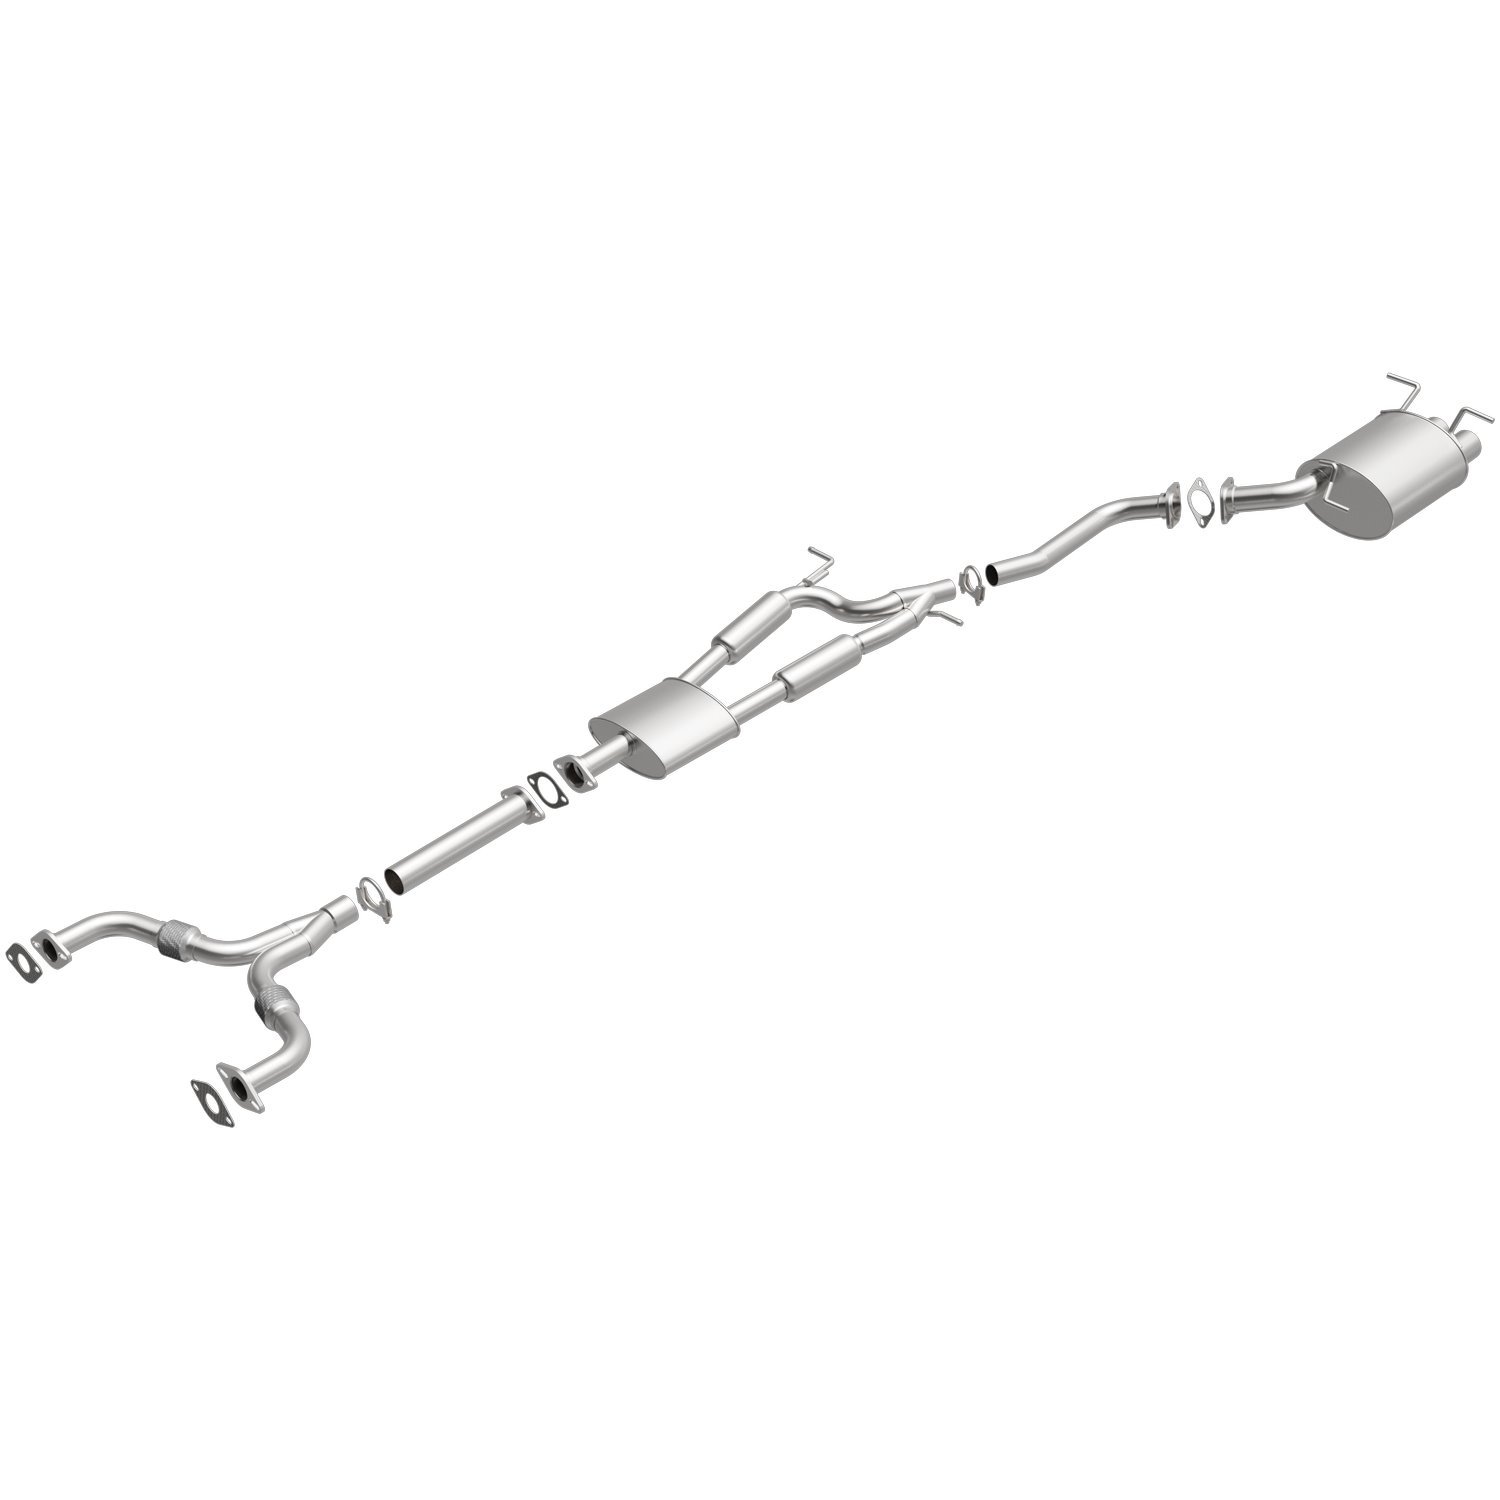 Direct-Fit Exhaust Kit, 2003-2004 Infiniti G35